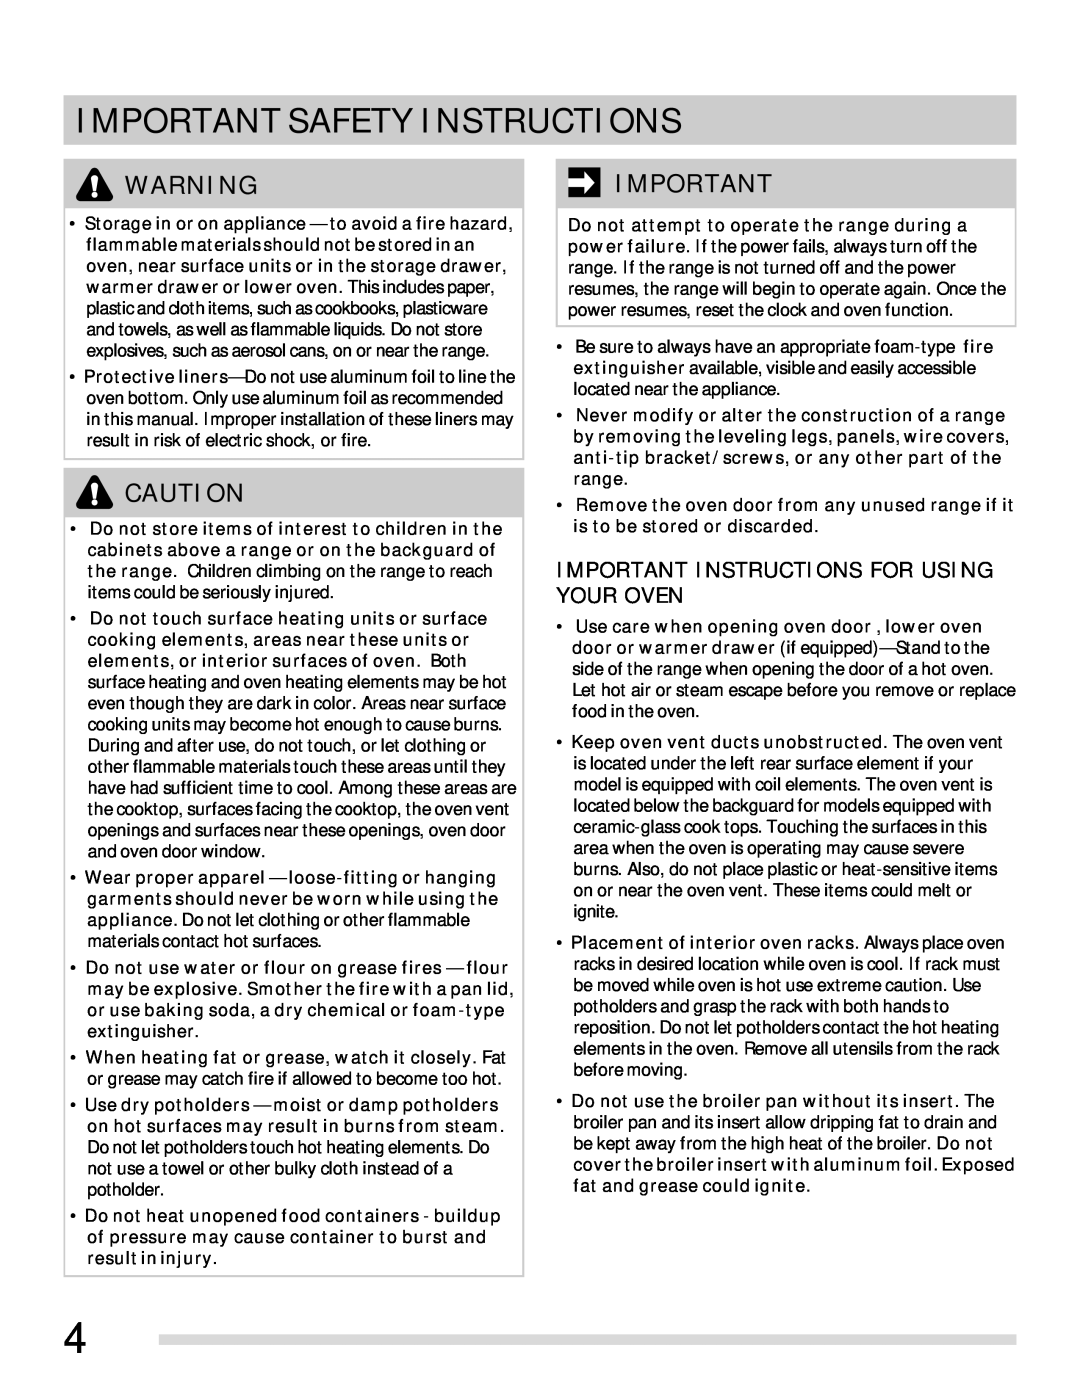 Frigidaire 316902315 Important Instructions For Using Your Oven, Important Safety Instructions 